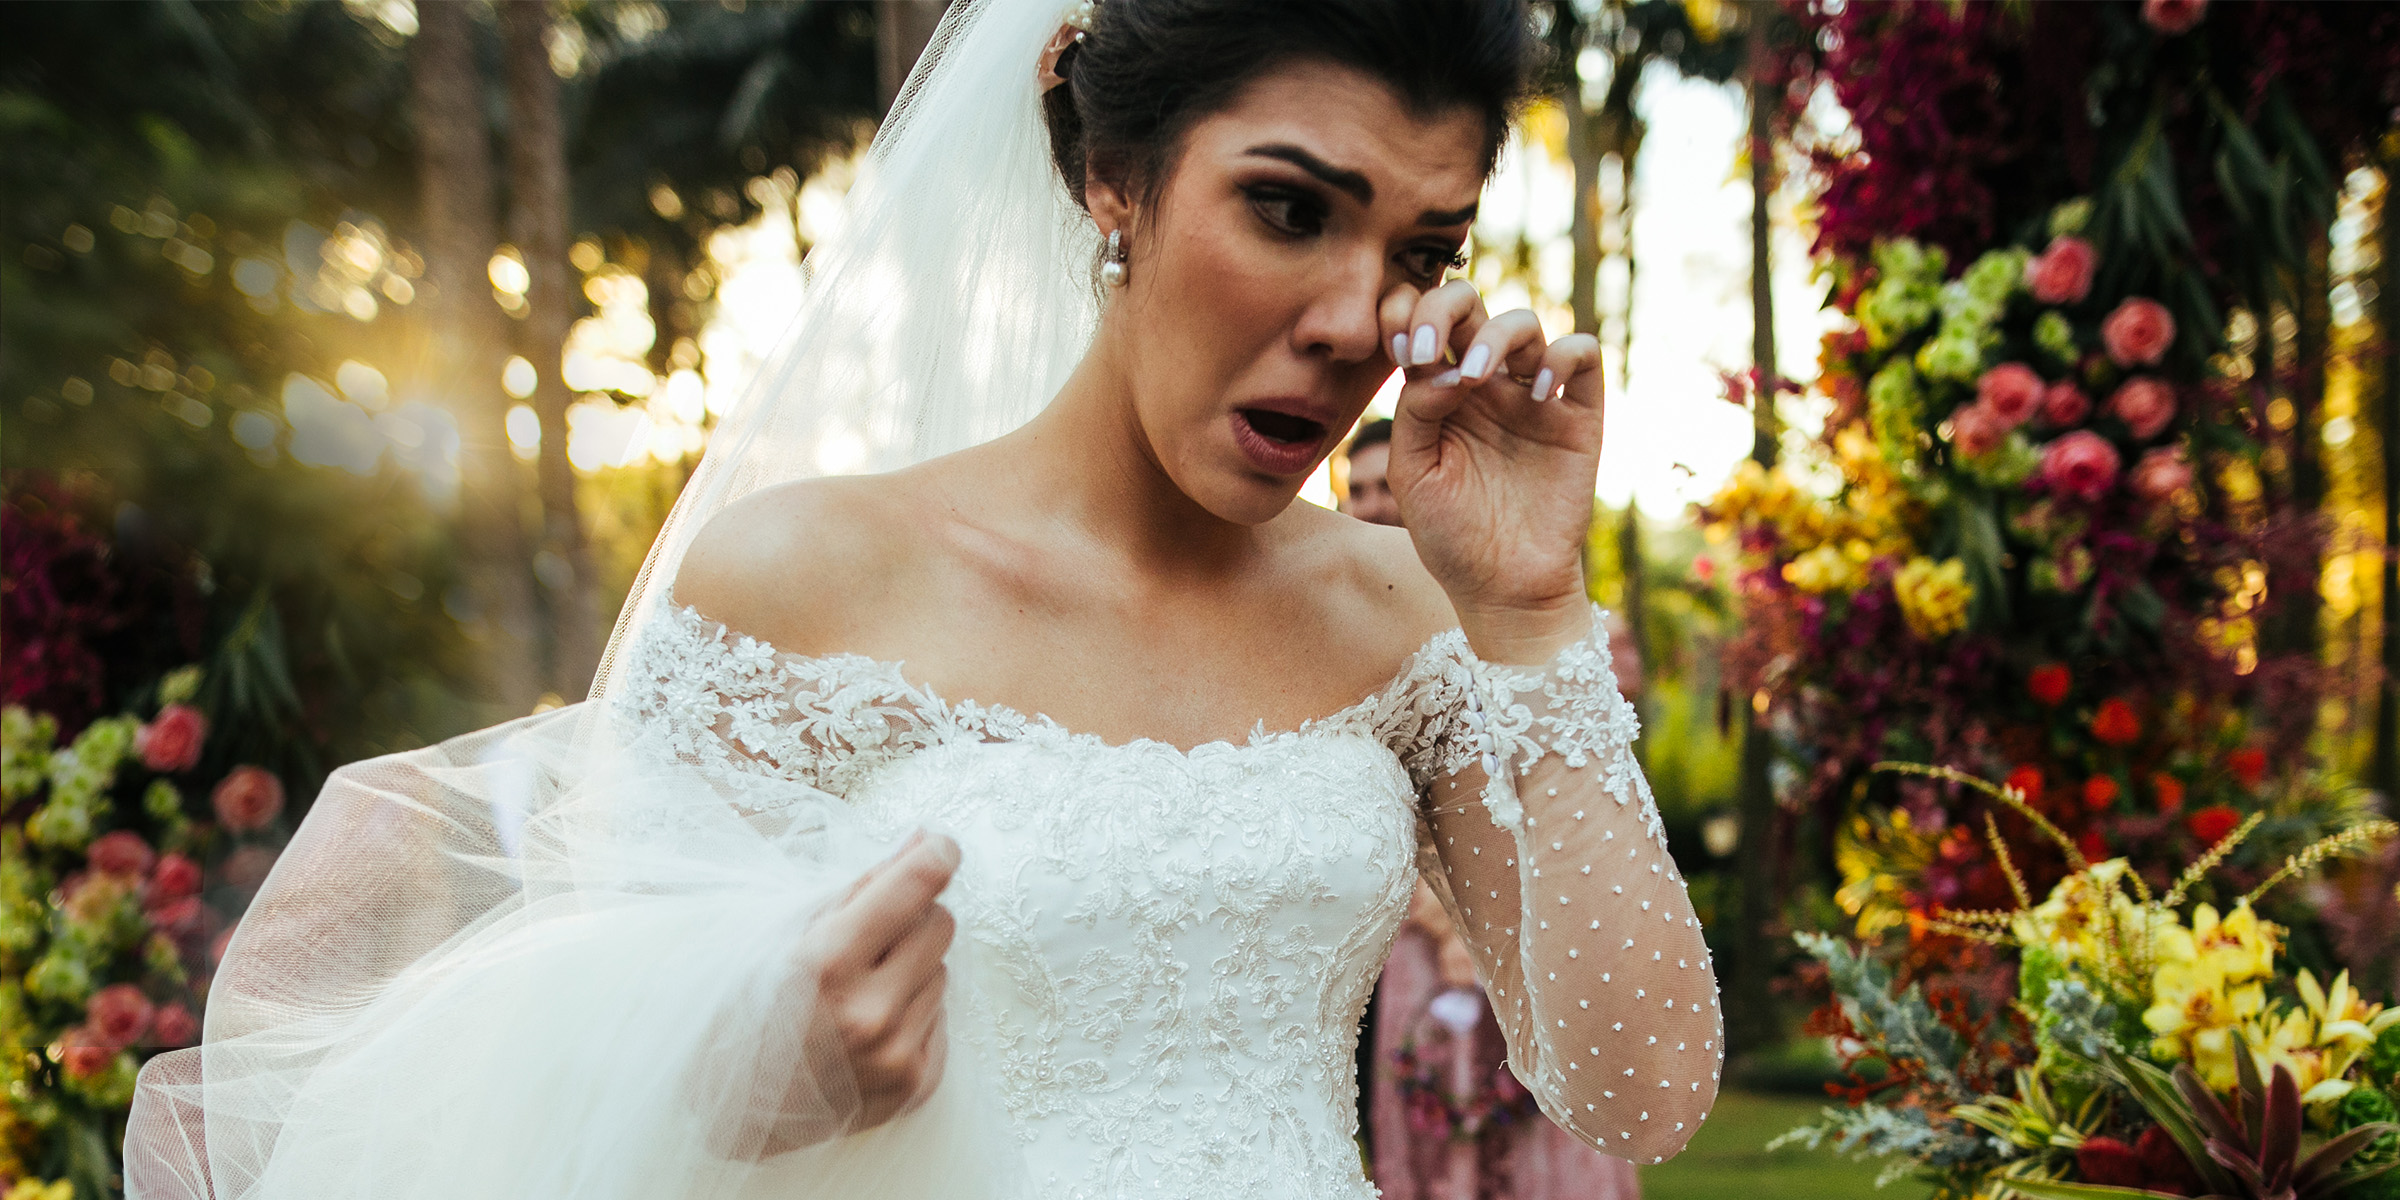 A bride crying | Source: Getty Images